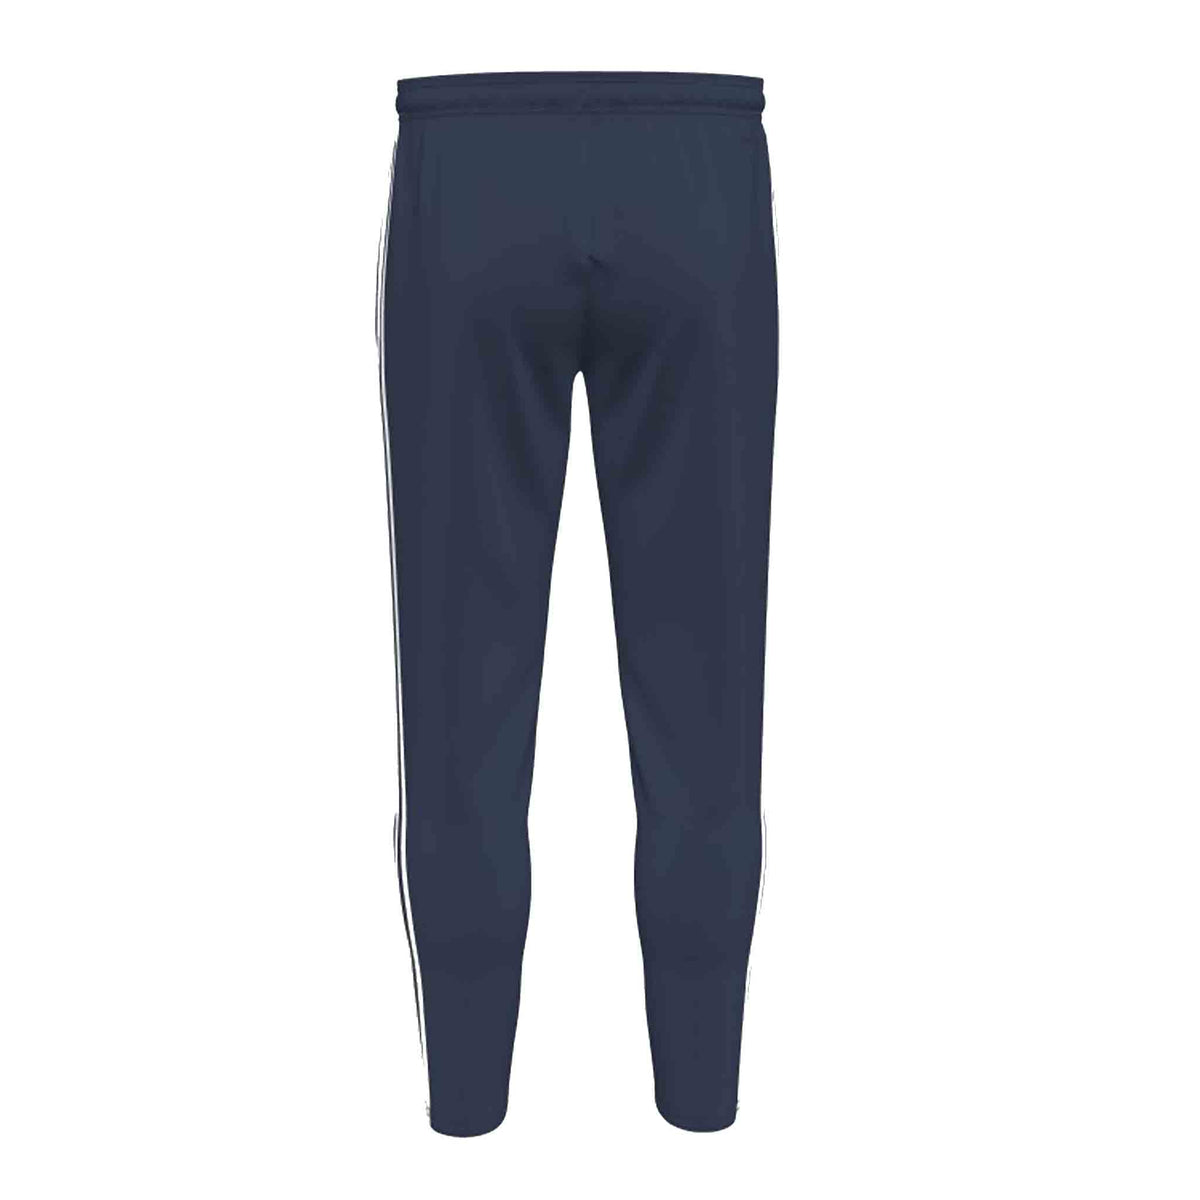 Hampstead and Westminster HC Men's Training Pants